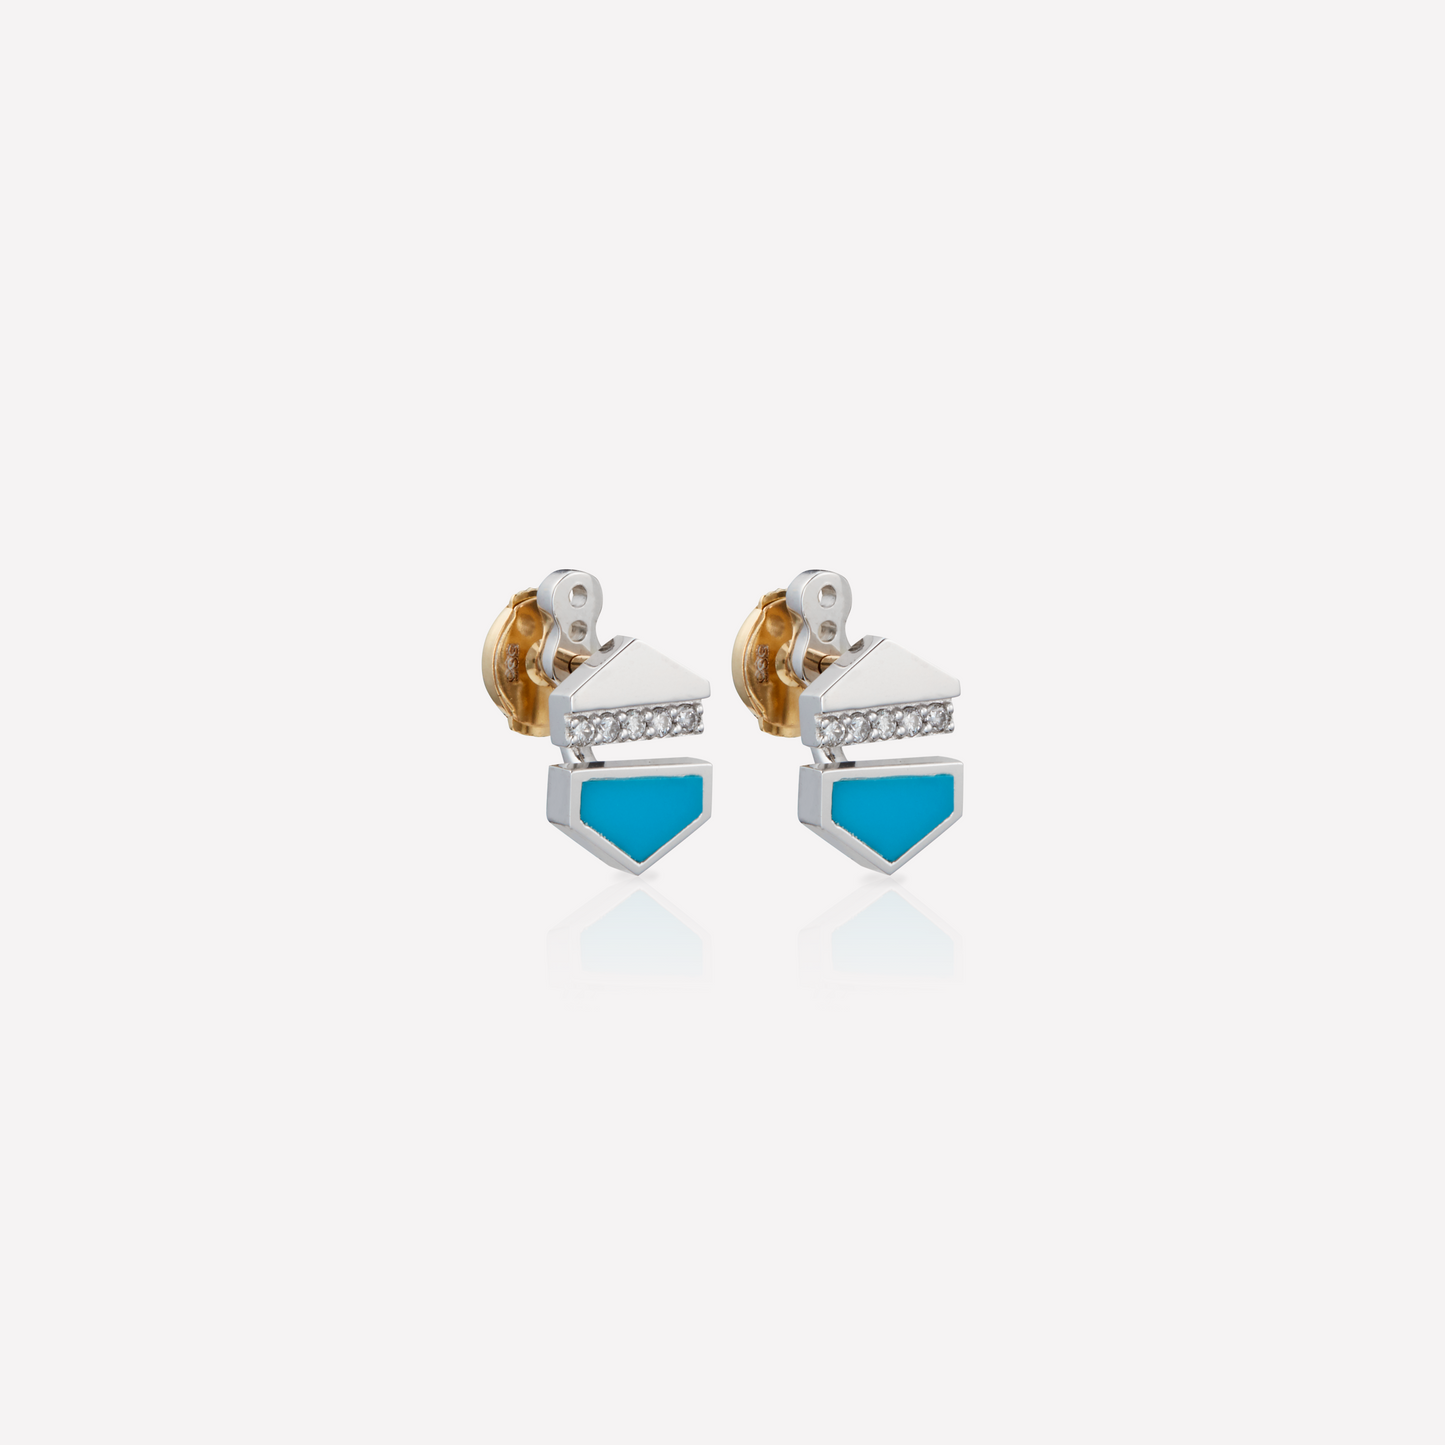 VOID Filled By You Earrings, Small, Turquoise, Diamond